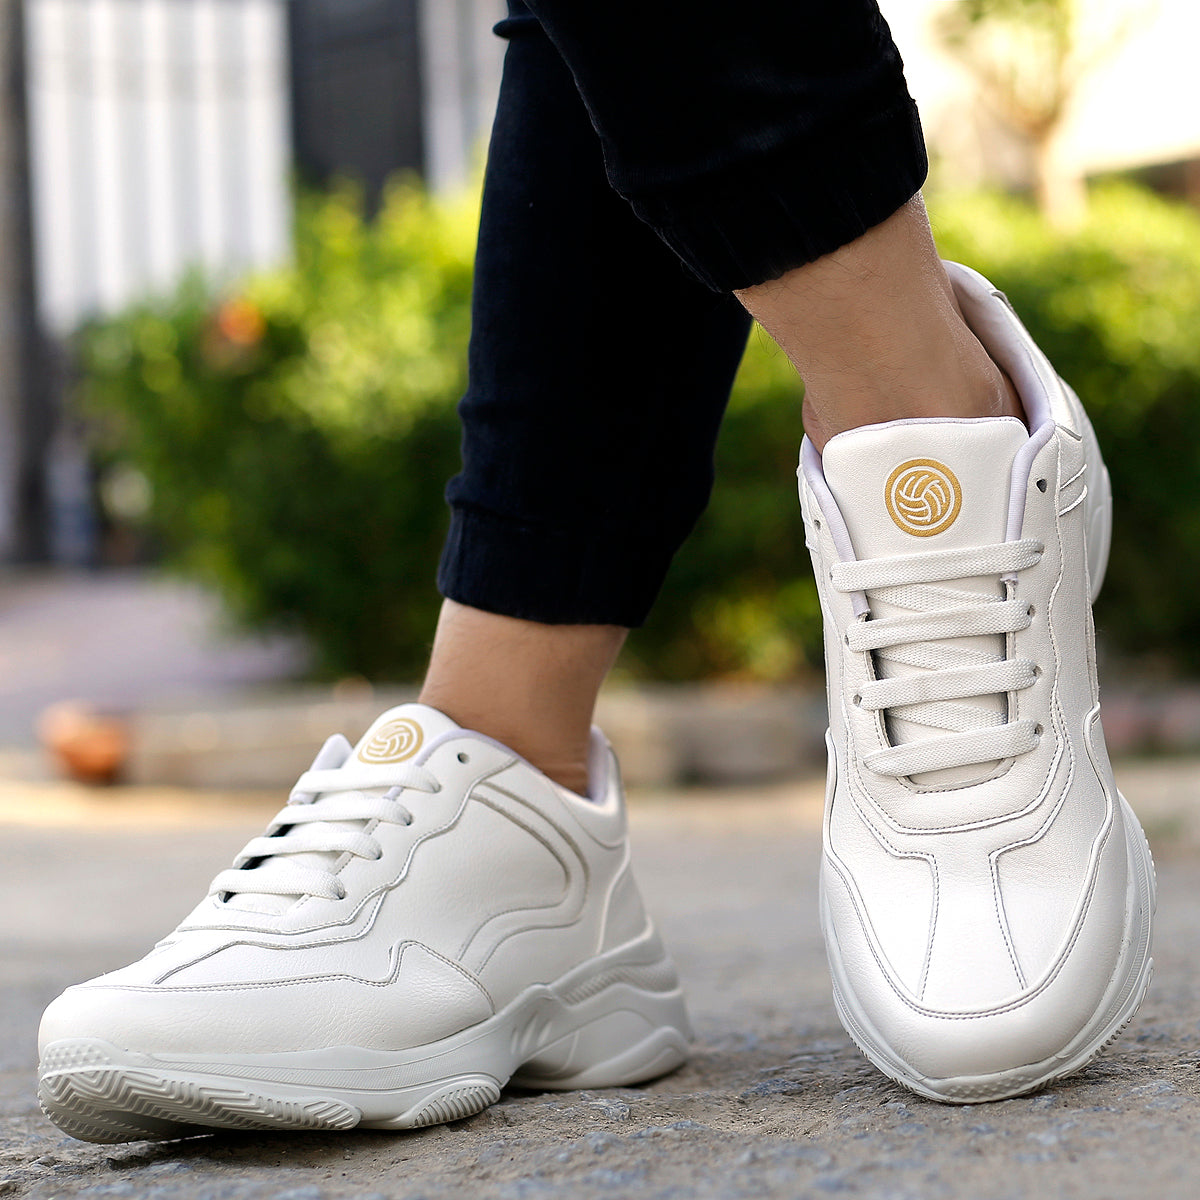 chunky white sneakers shoes for men, chunky white sneakers for men, white sneakers shoes for men, best white sneakers for men